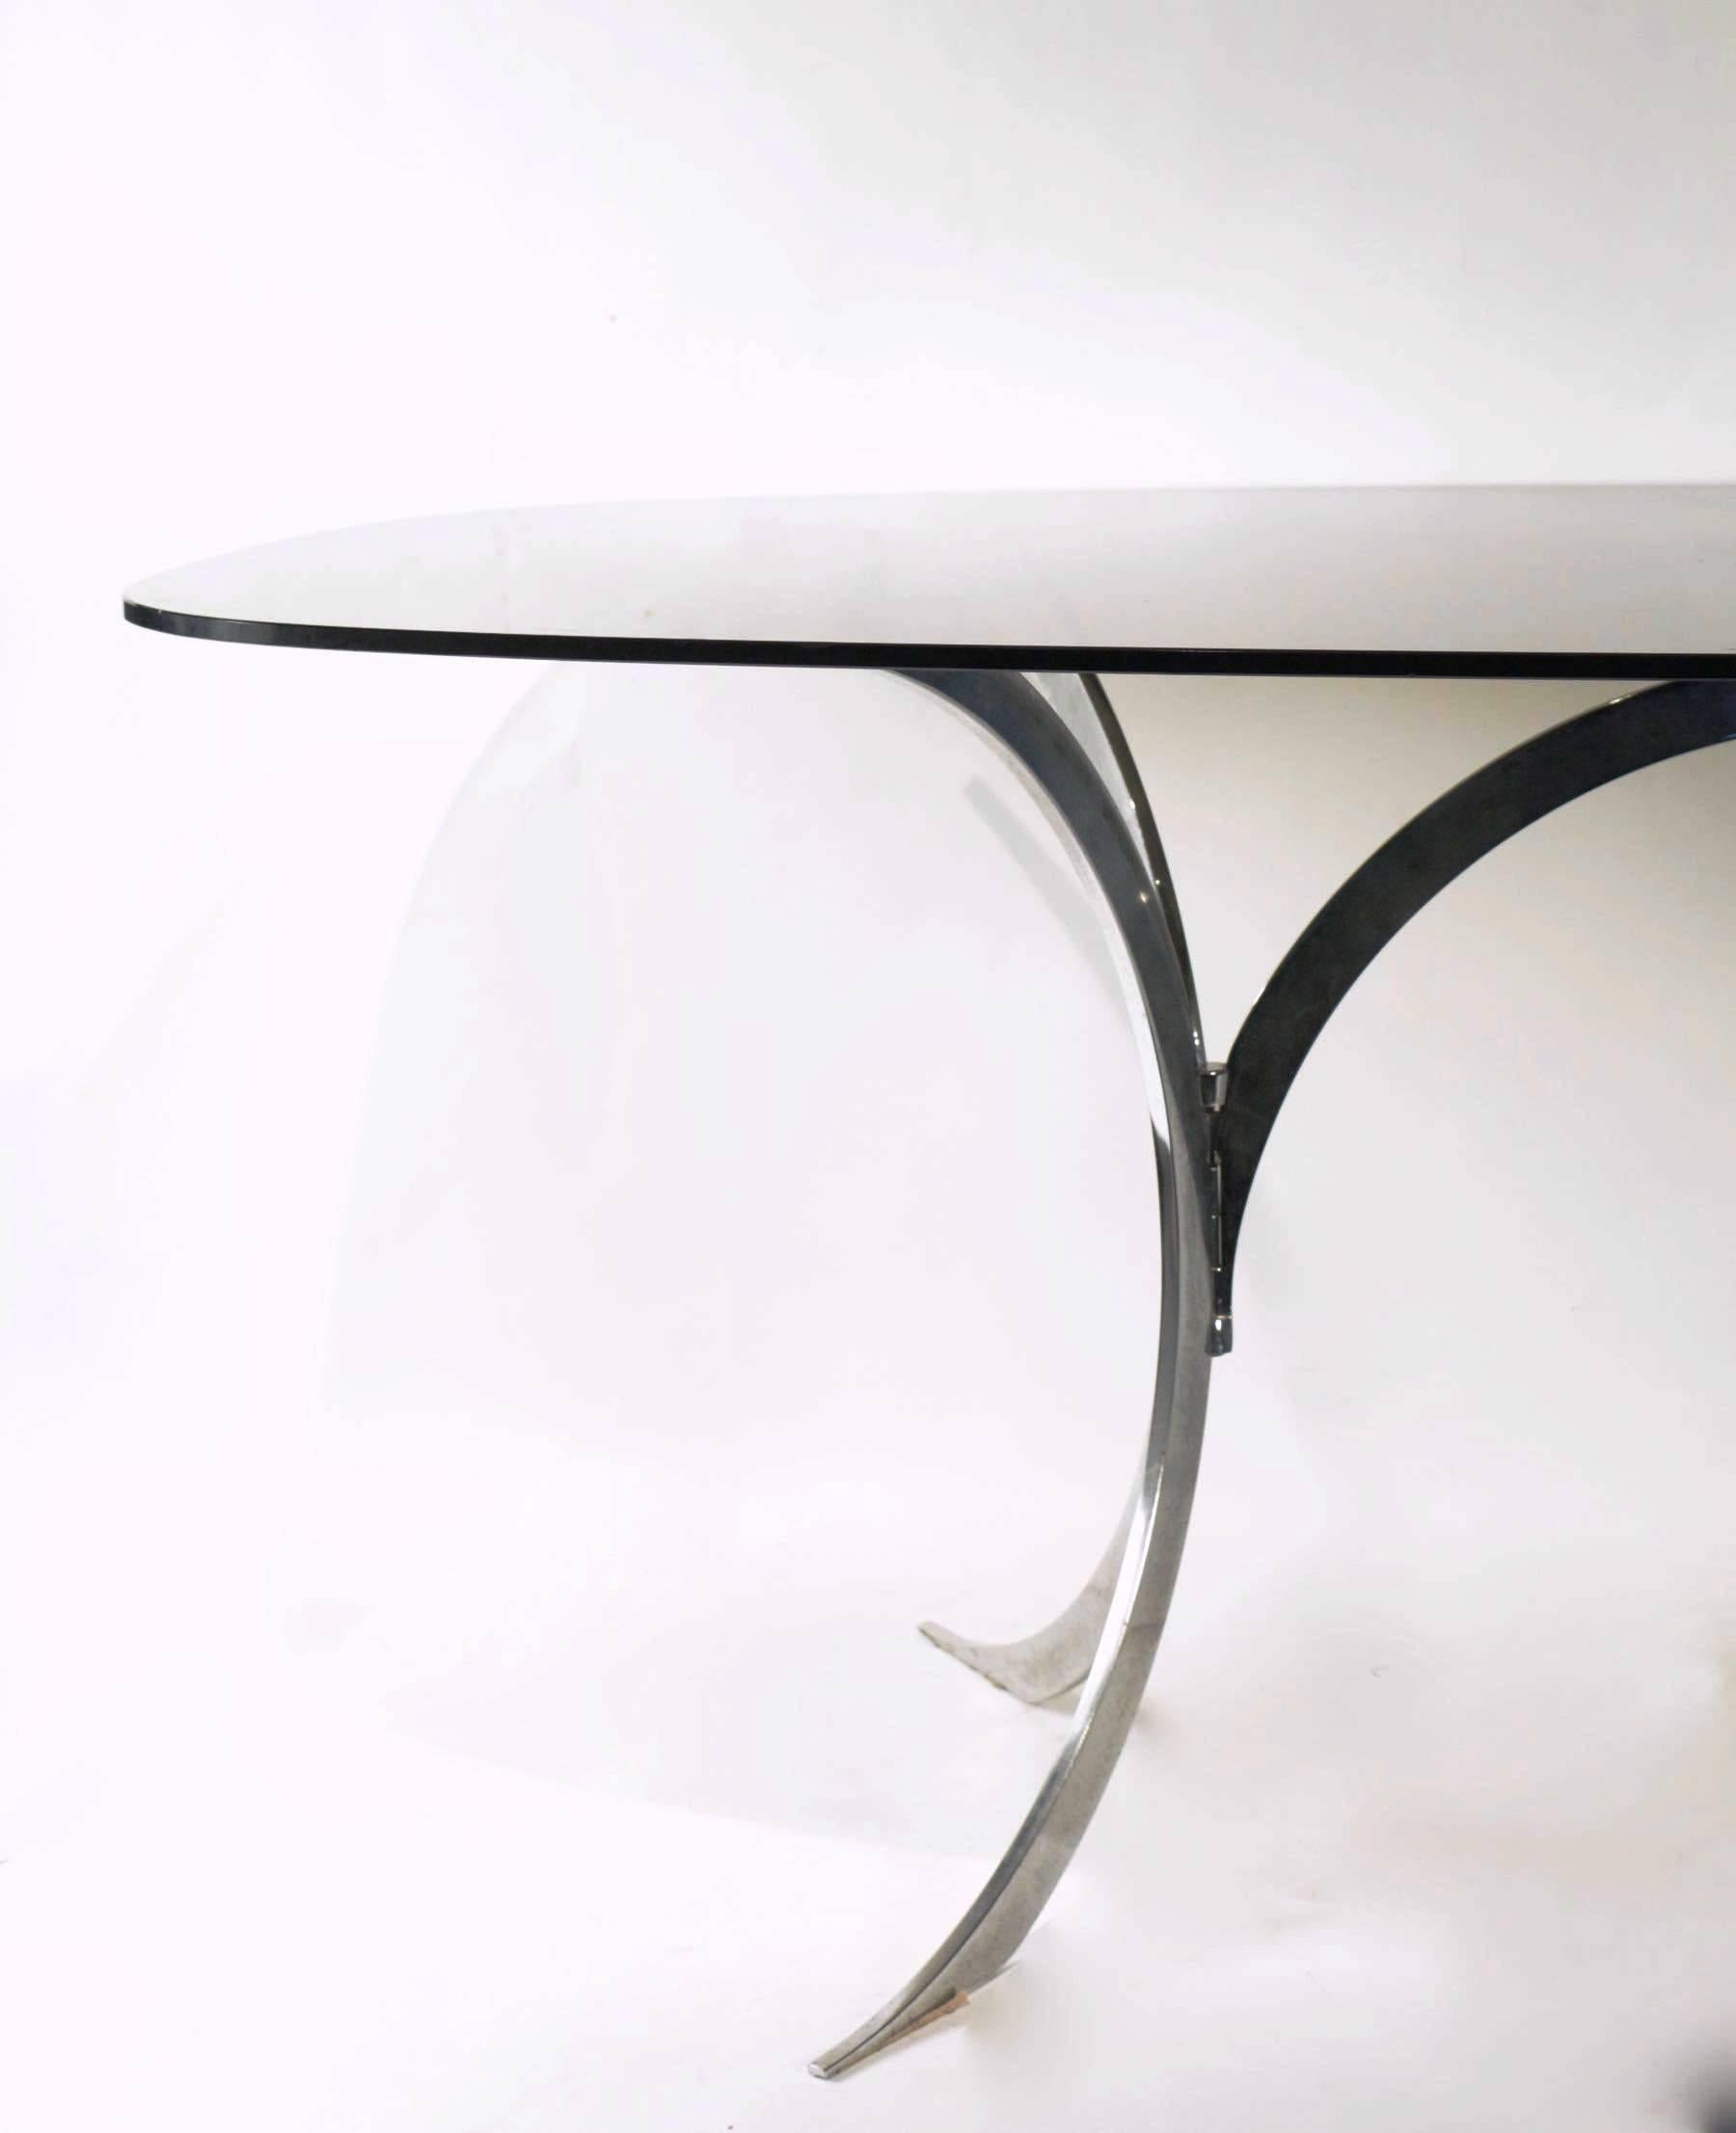 Late 20th Century 1970s Oval Dining Room Table, Chrome Base, Smoked Glass Top, French